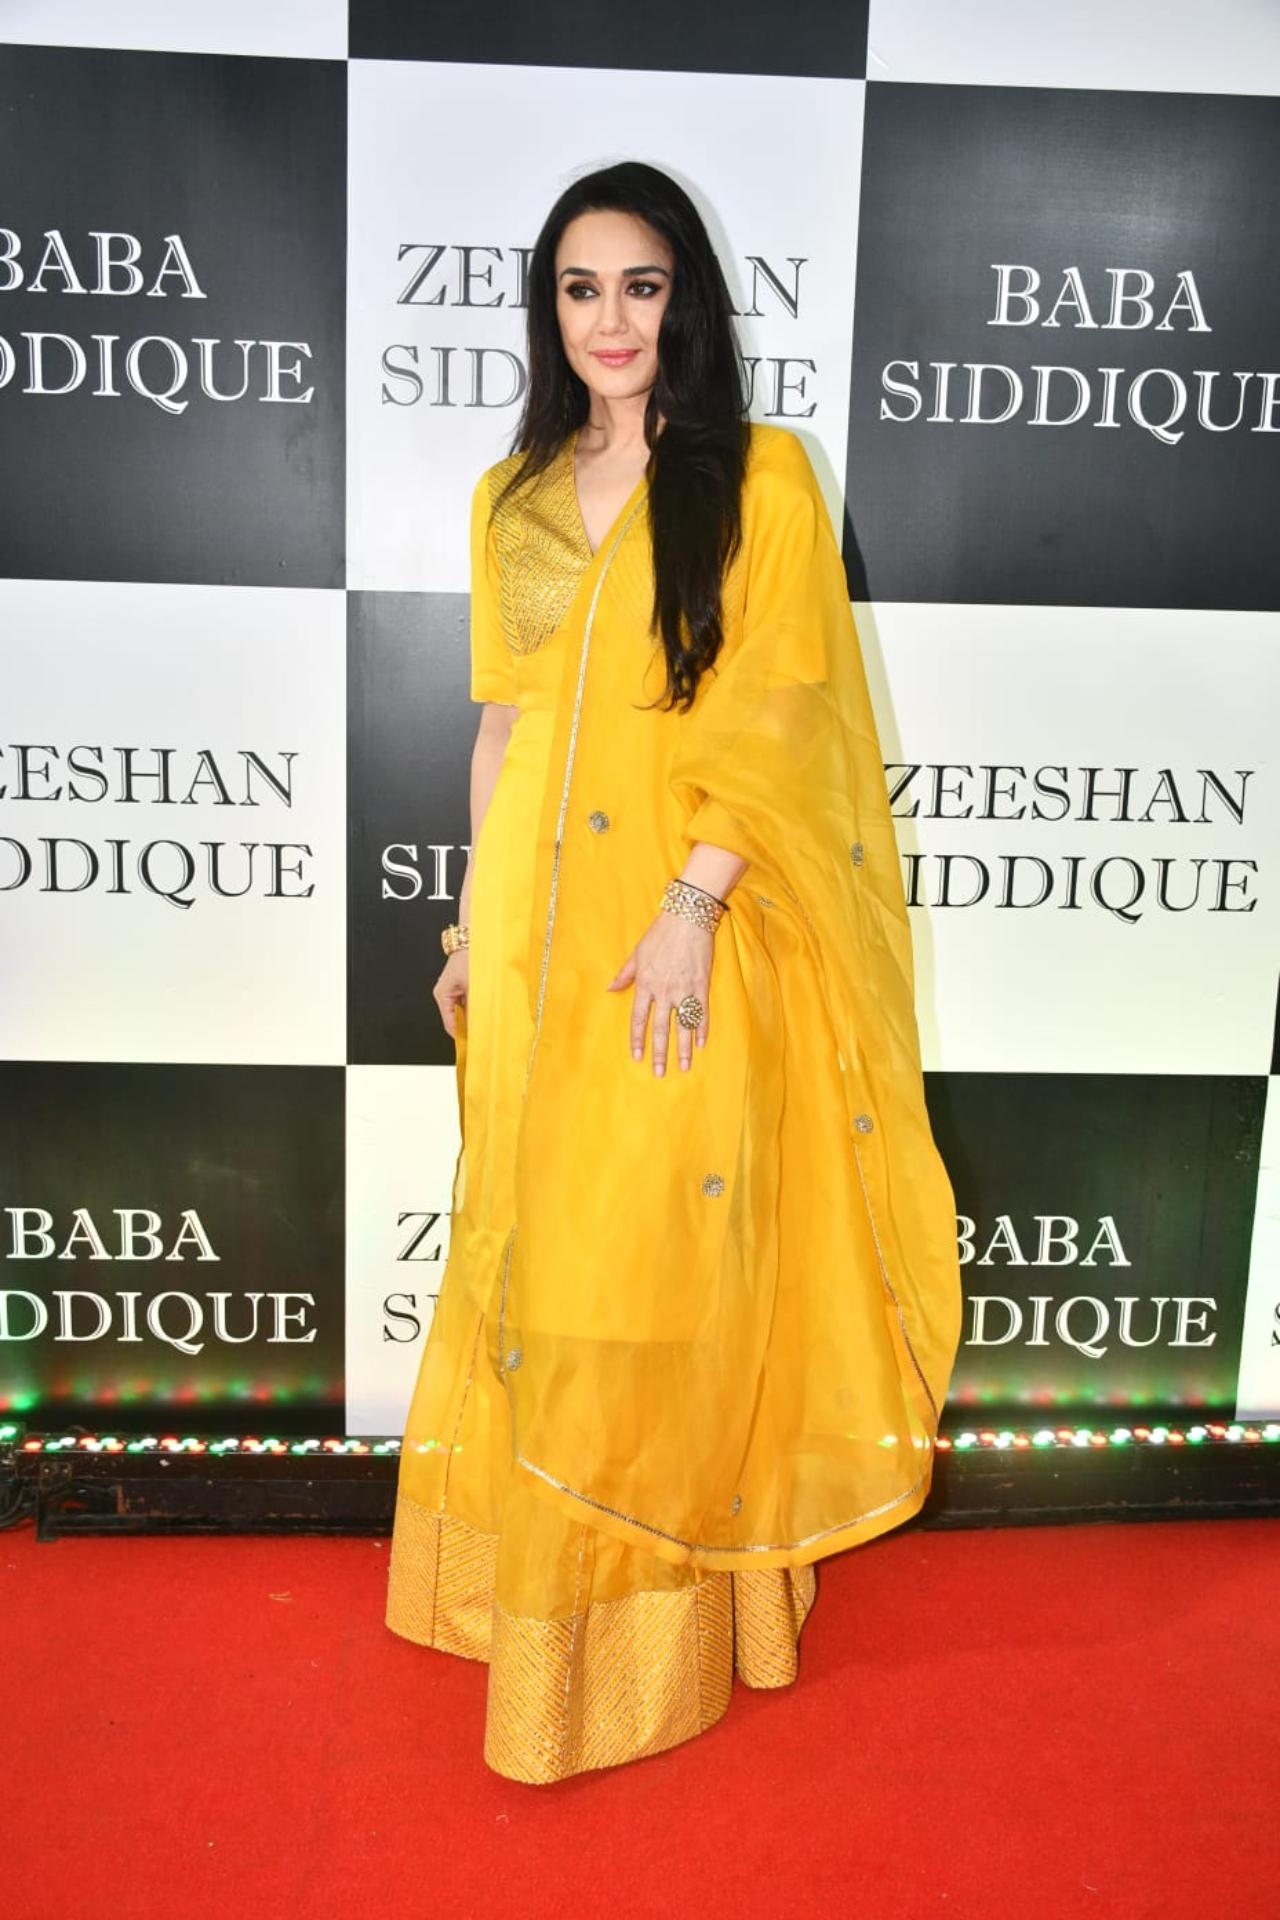 Preity Zinta looked stunning as ever in a yellow suit